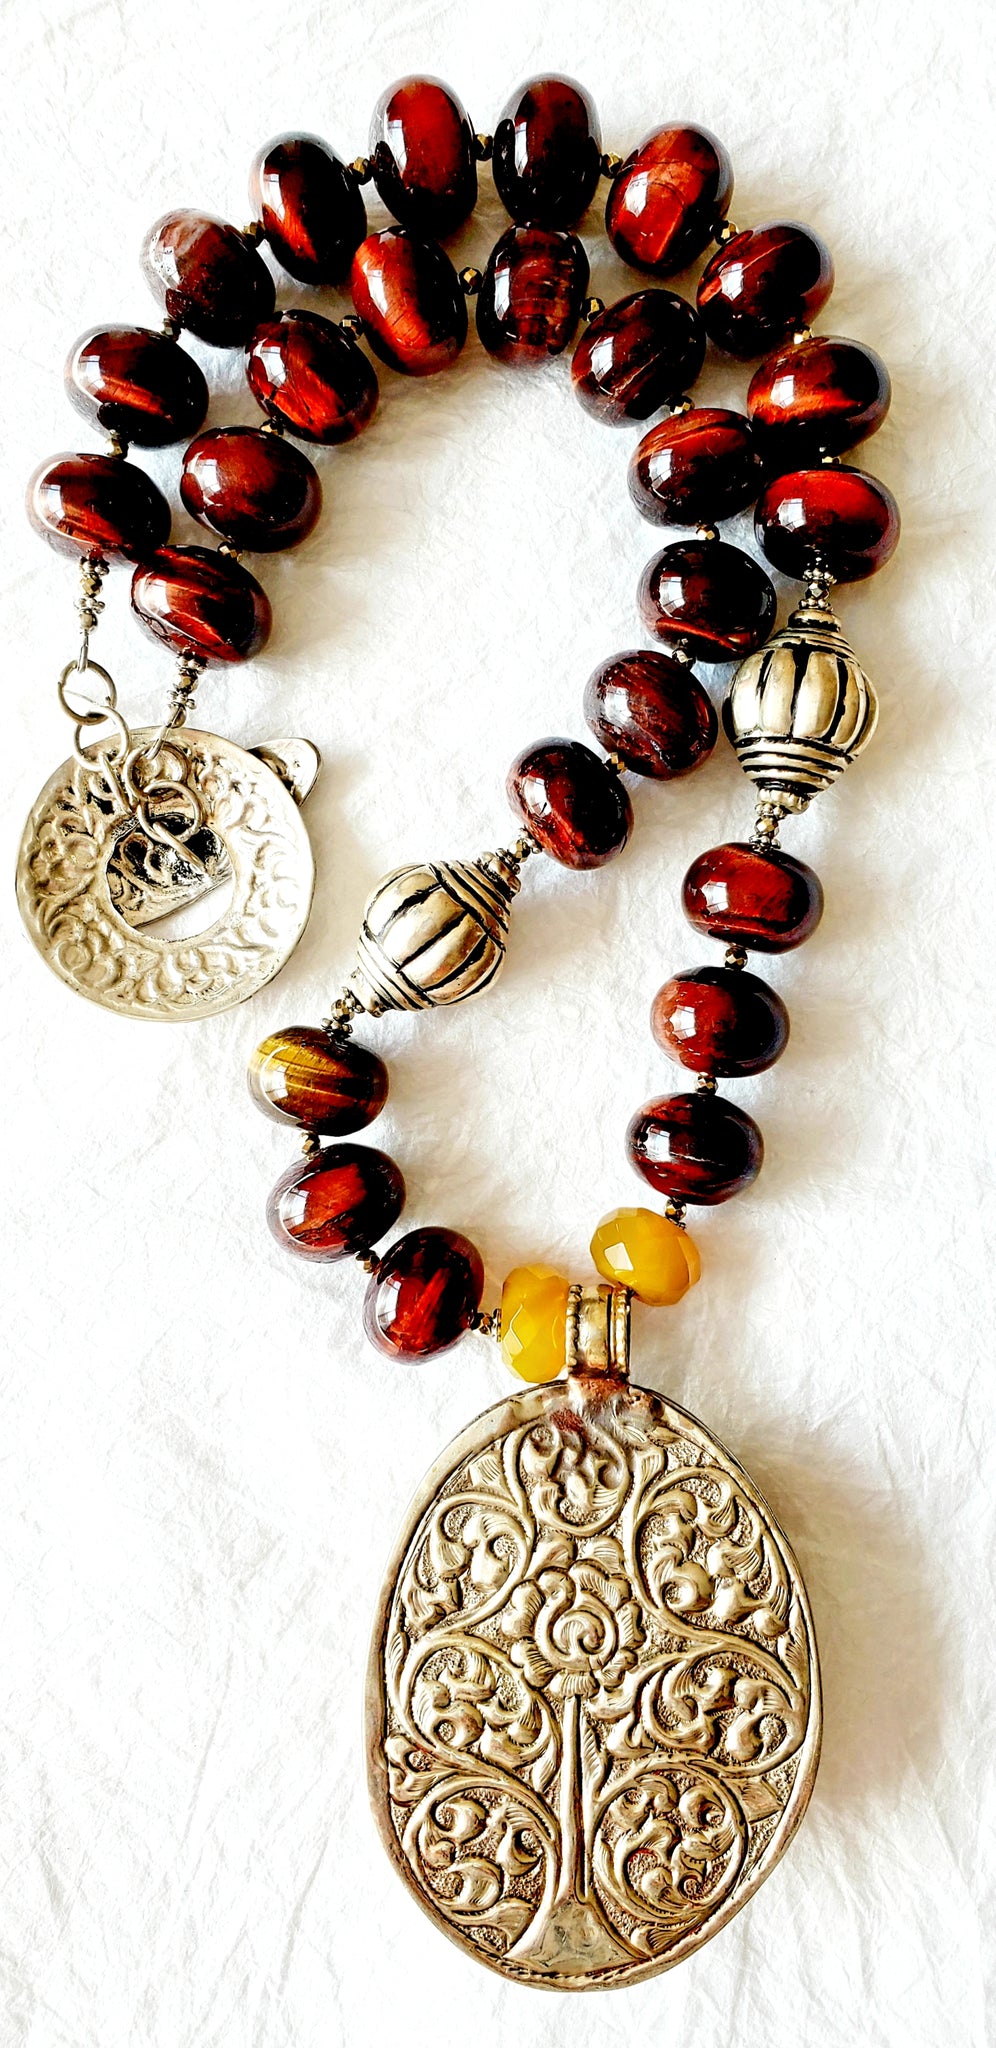 Tiger Eye Bead and Pendant Yellow Agate Stone Repousee Toggle Clasp Statement Necklace